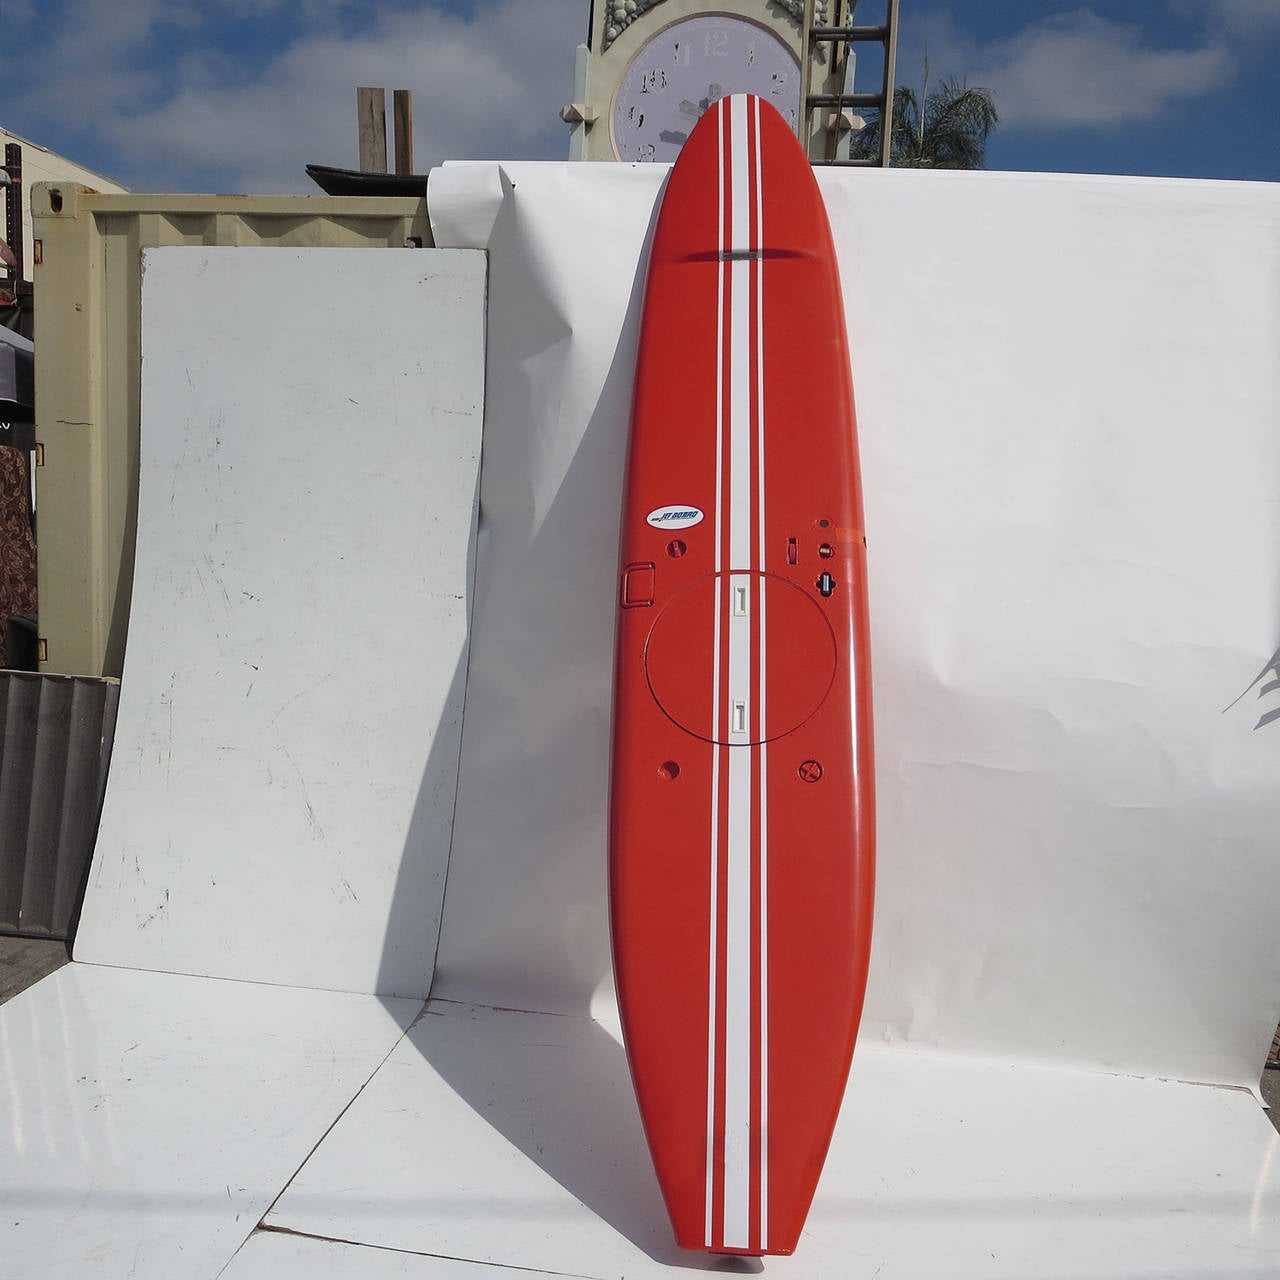 Produced from 1965 to 1968, the jet board was the design of a former Boeing Aviation engineer. The aluminum surfboard is powered by a 6.25 horsepower Tecumsuh engine and jet propulsion system. Air is vented through the front of the board and